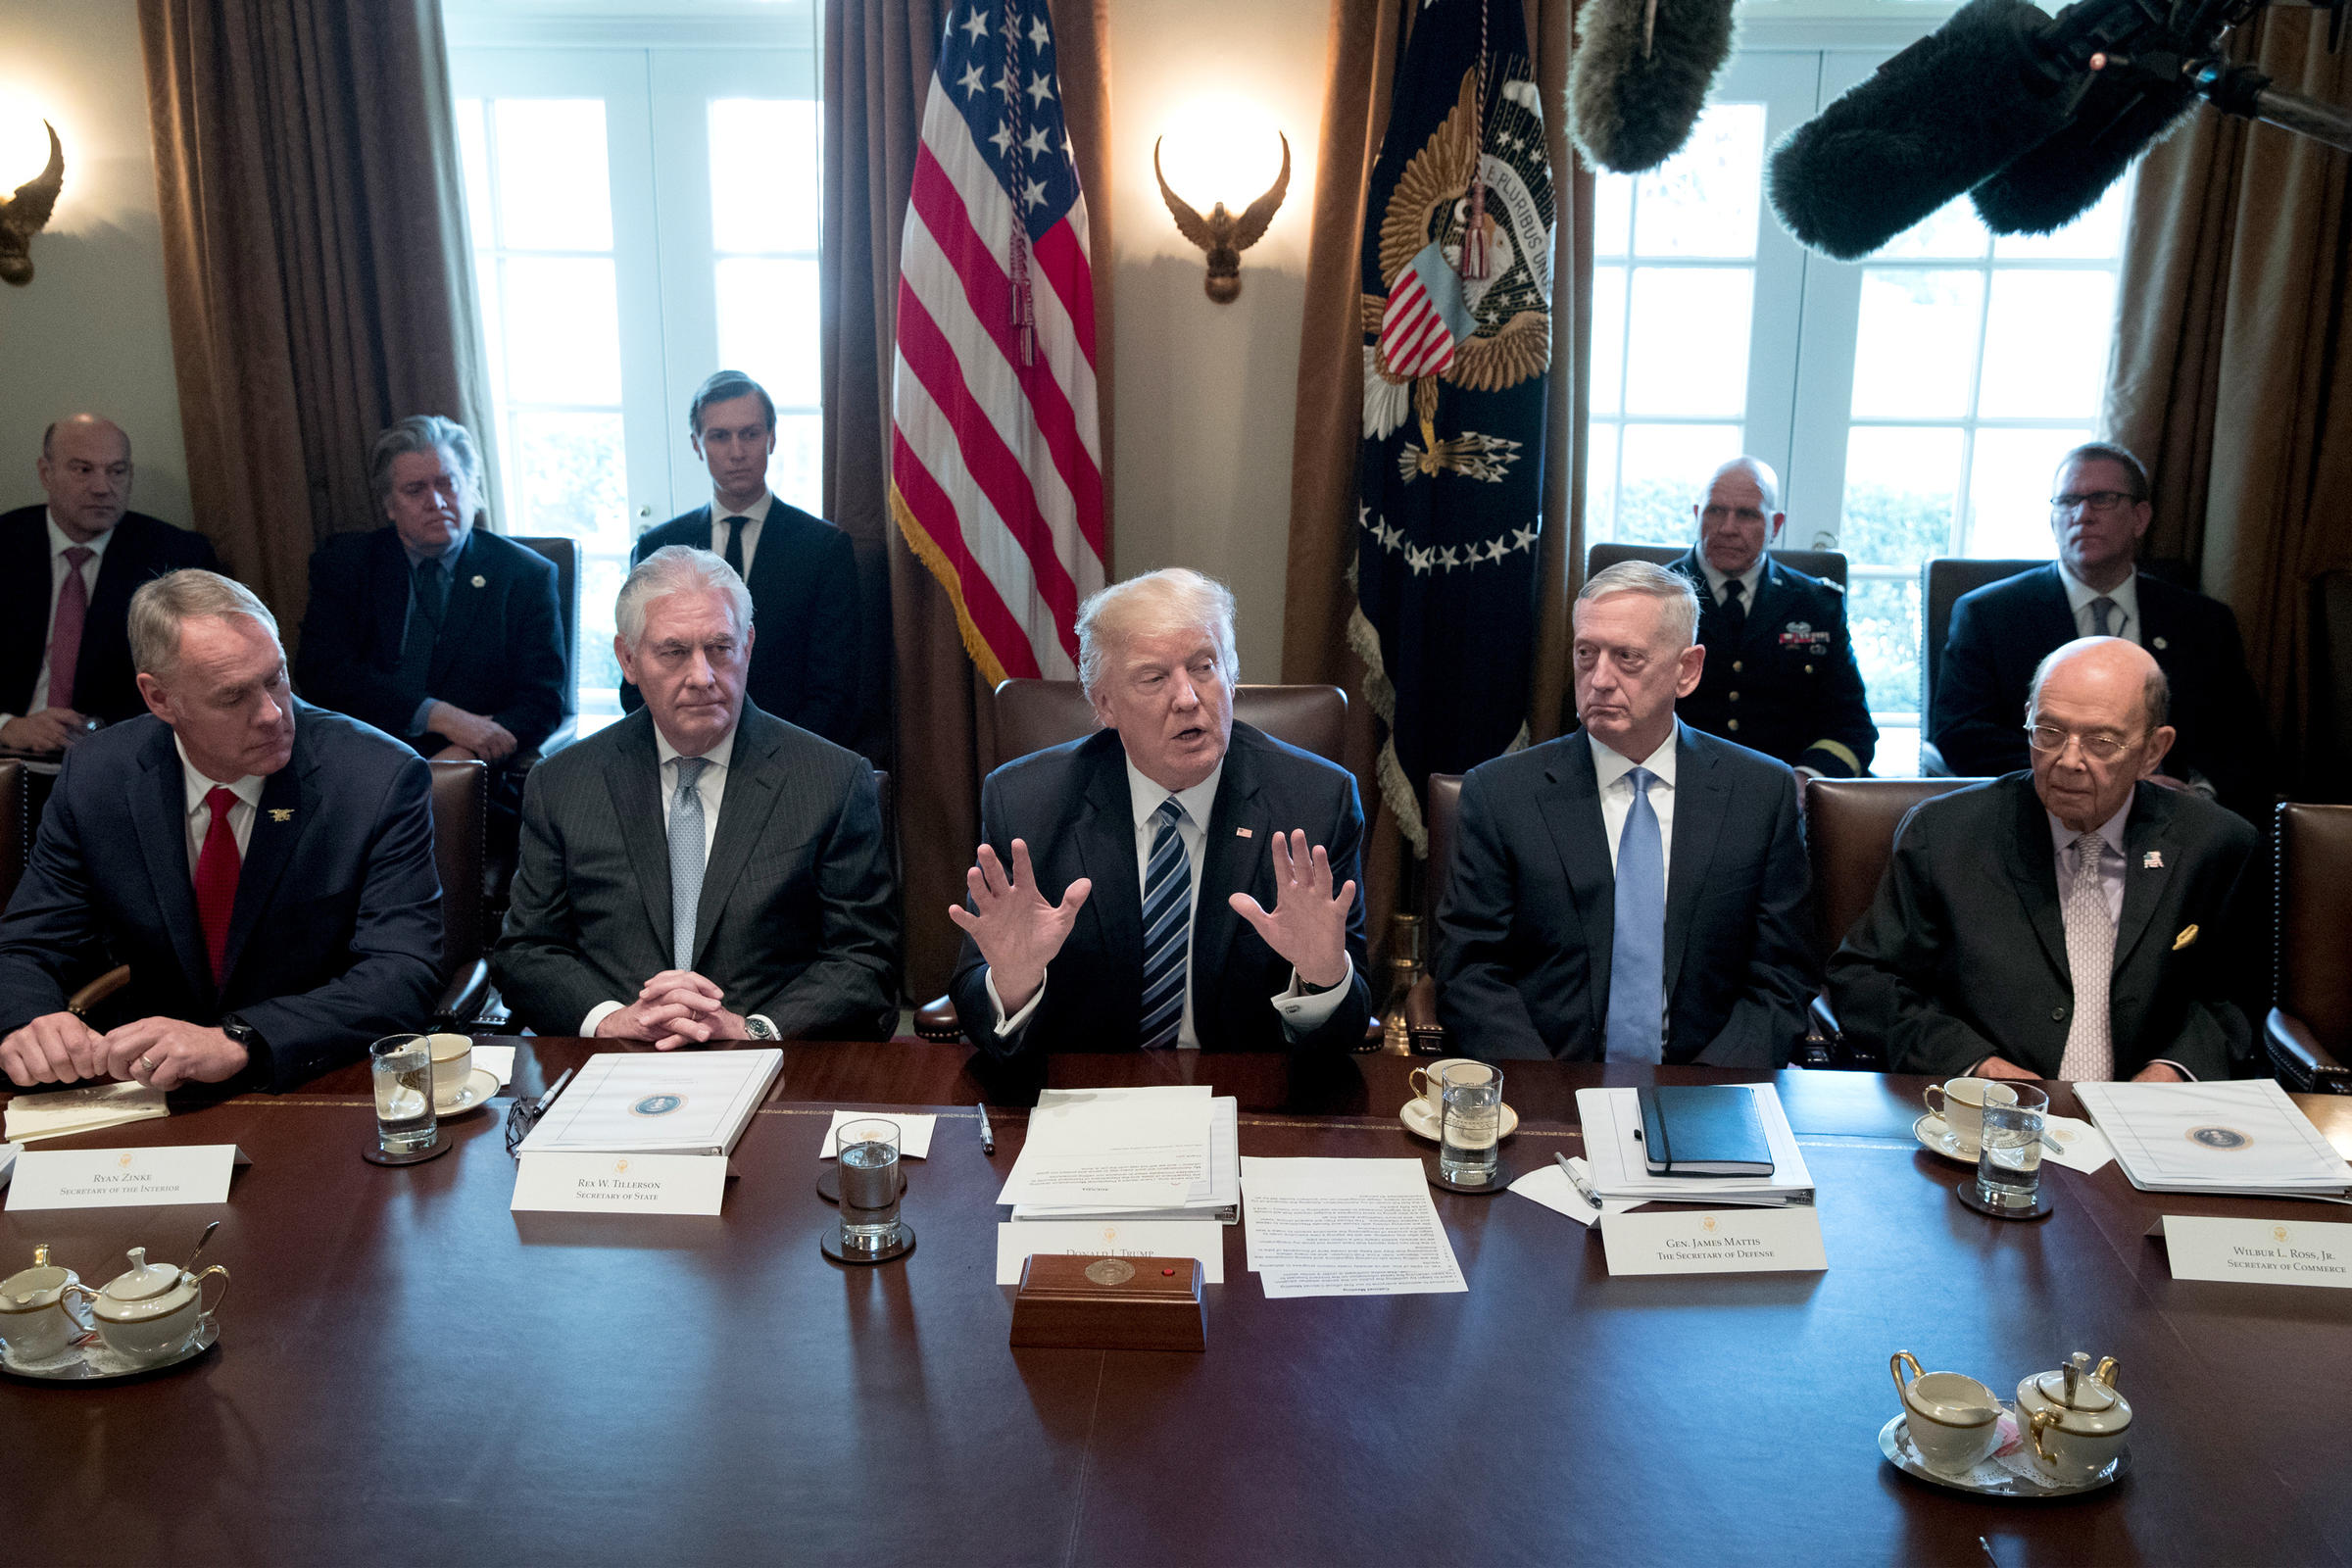 President Donald Trump holds his first official meeting with members of his Cabinet, including (from left) Secretary of the Interior Ryan Zinke, Secretary of State Rex Tillerson, Secretary of Defense James Mattis and Secretary of Commerce Wilbur Ross in March.